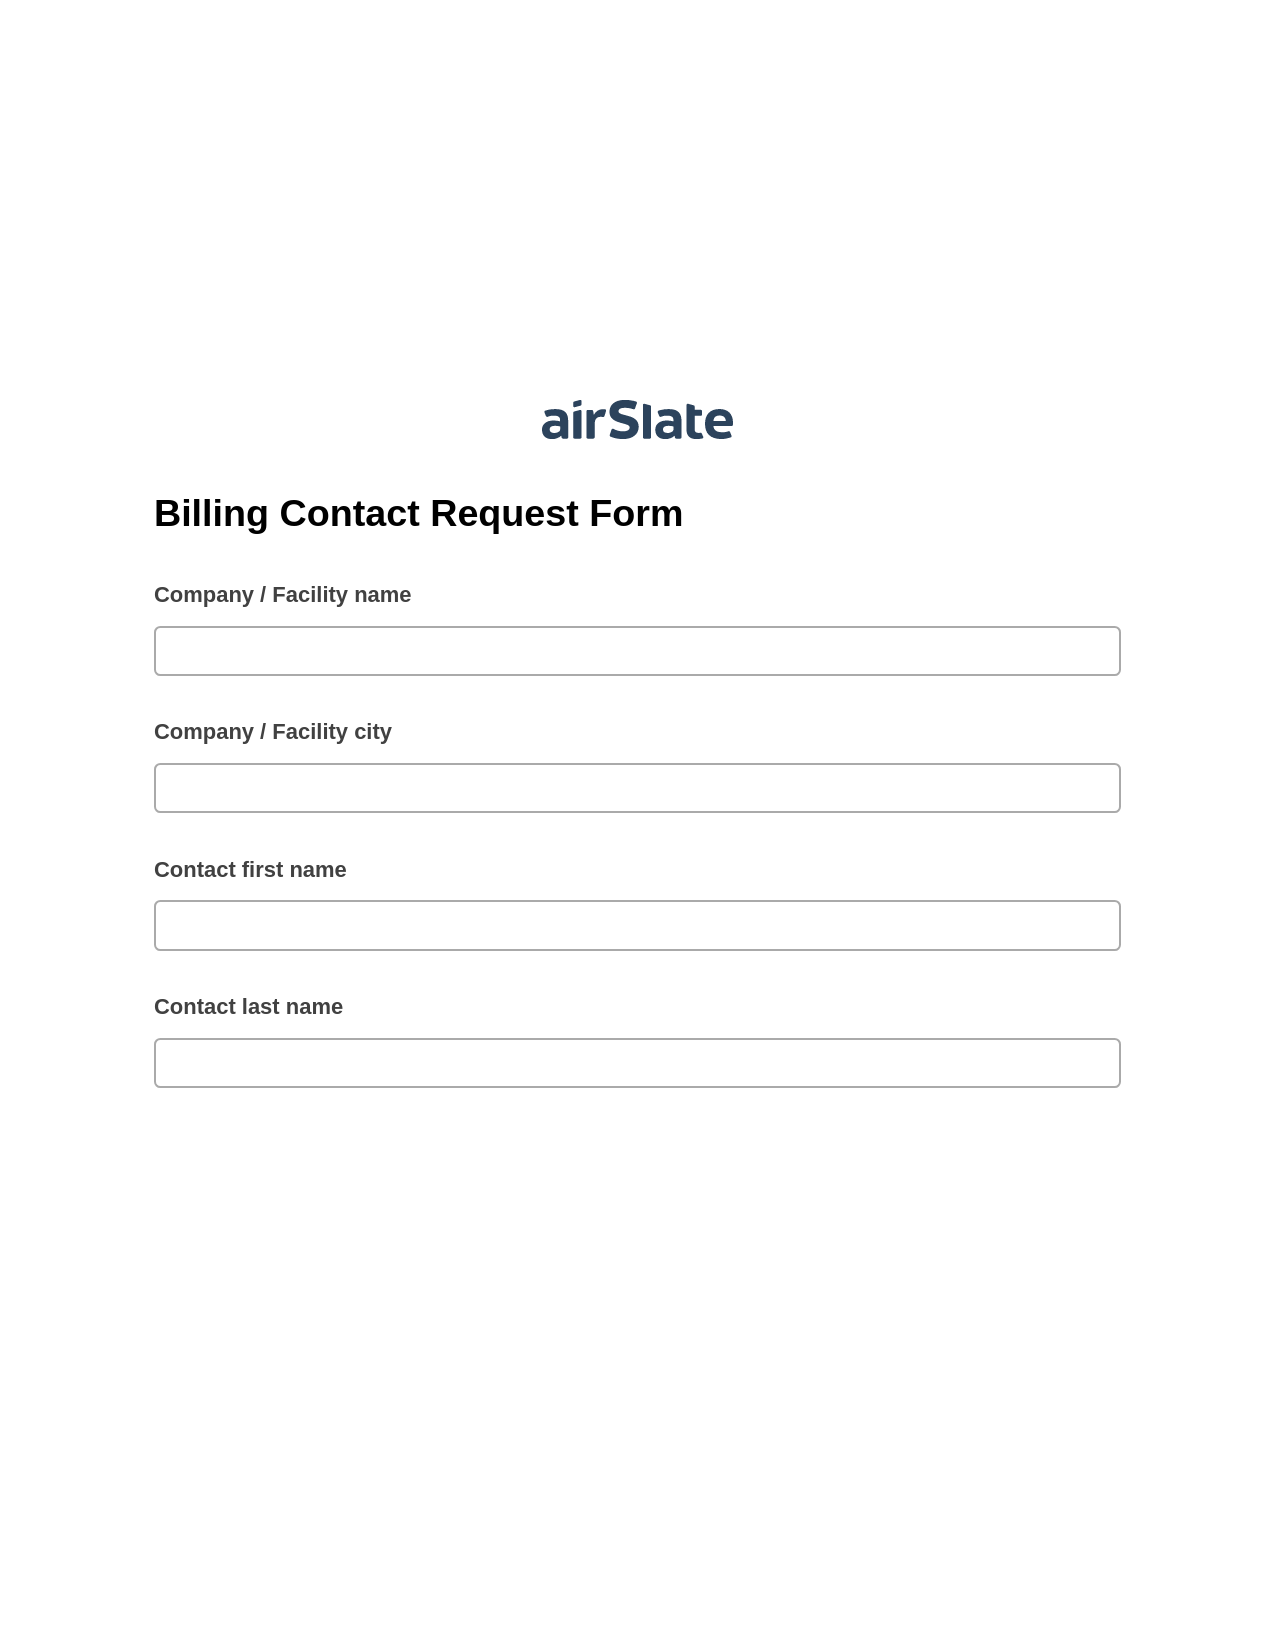 Billing Contact Request Form Pre-fill from CSV File Bot, Update MS Dynamics 365 Records Bot, Box Bot